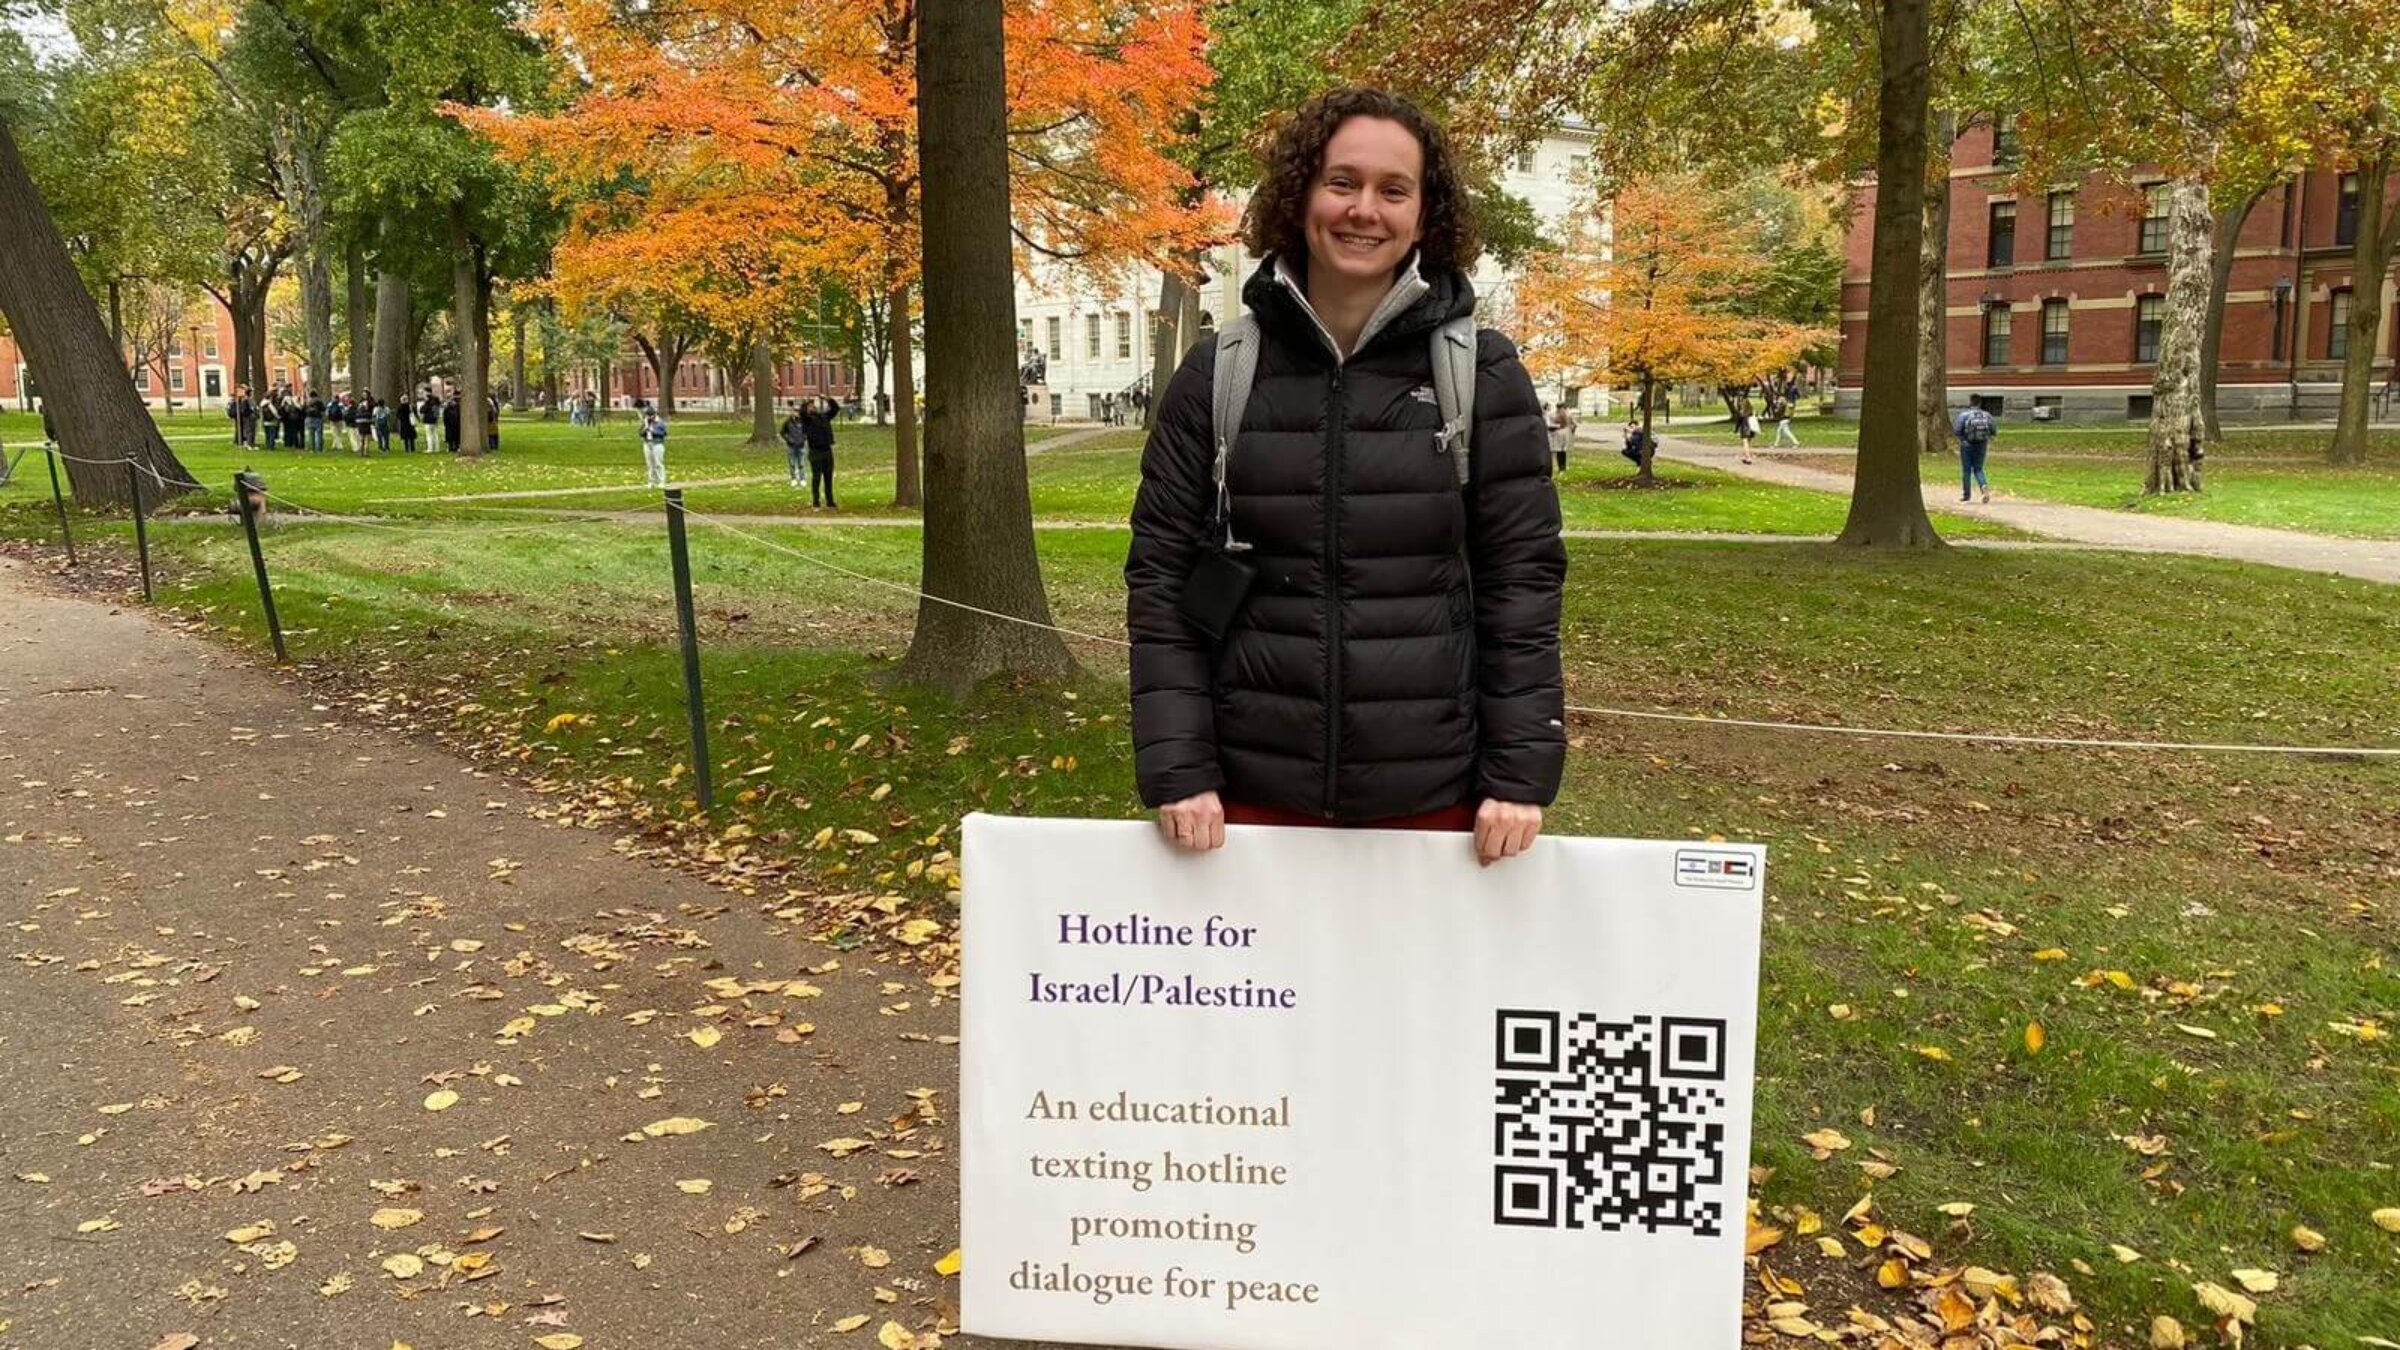 Shira Hoffer in Harvard Yard with a sign for her hotline providing resources and information about the Israeli-Palestinian conflict.